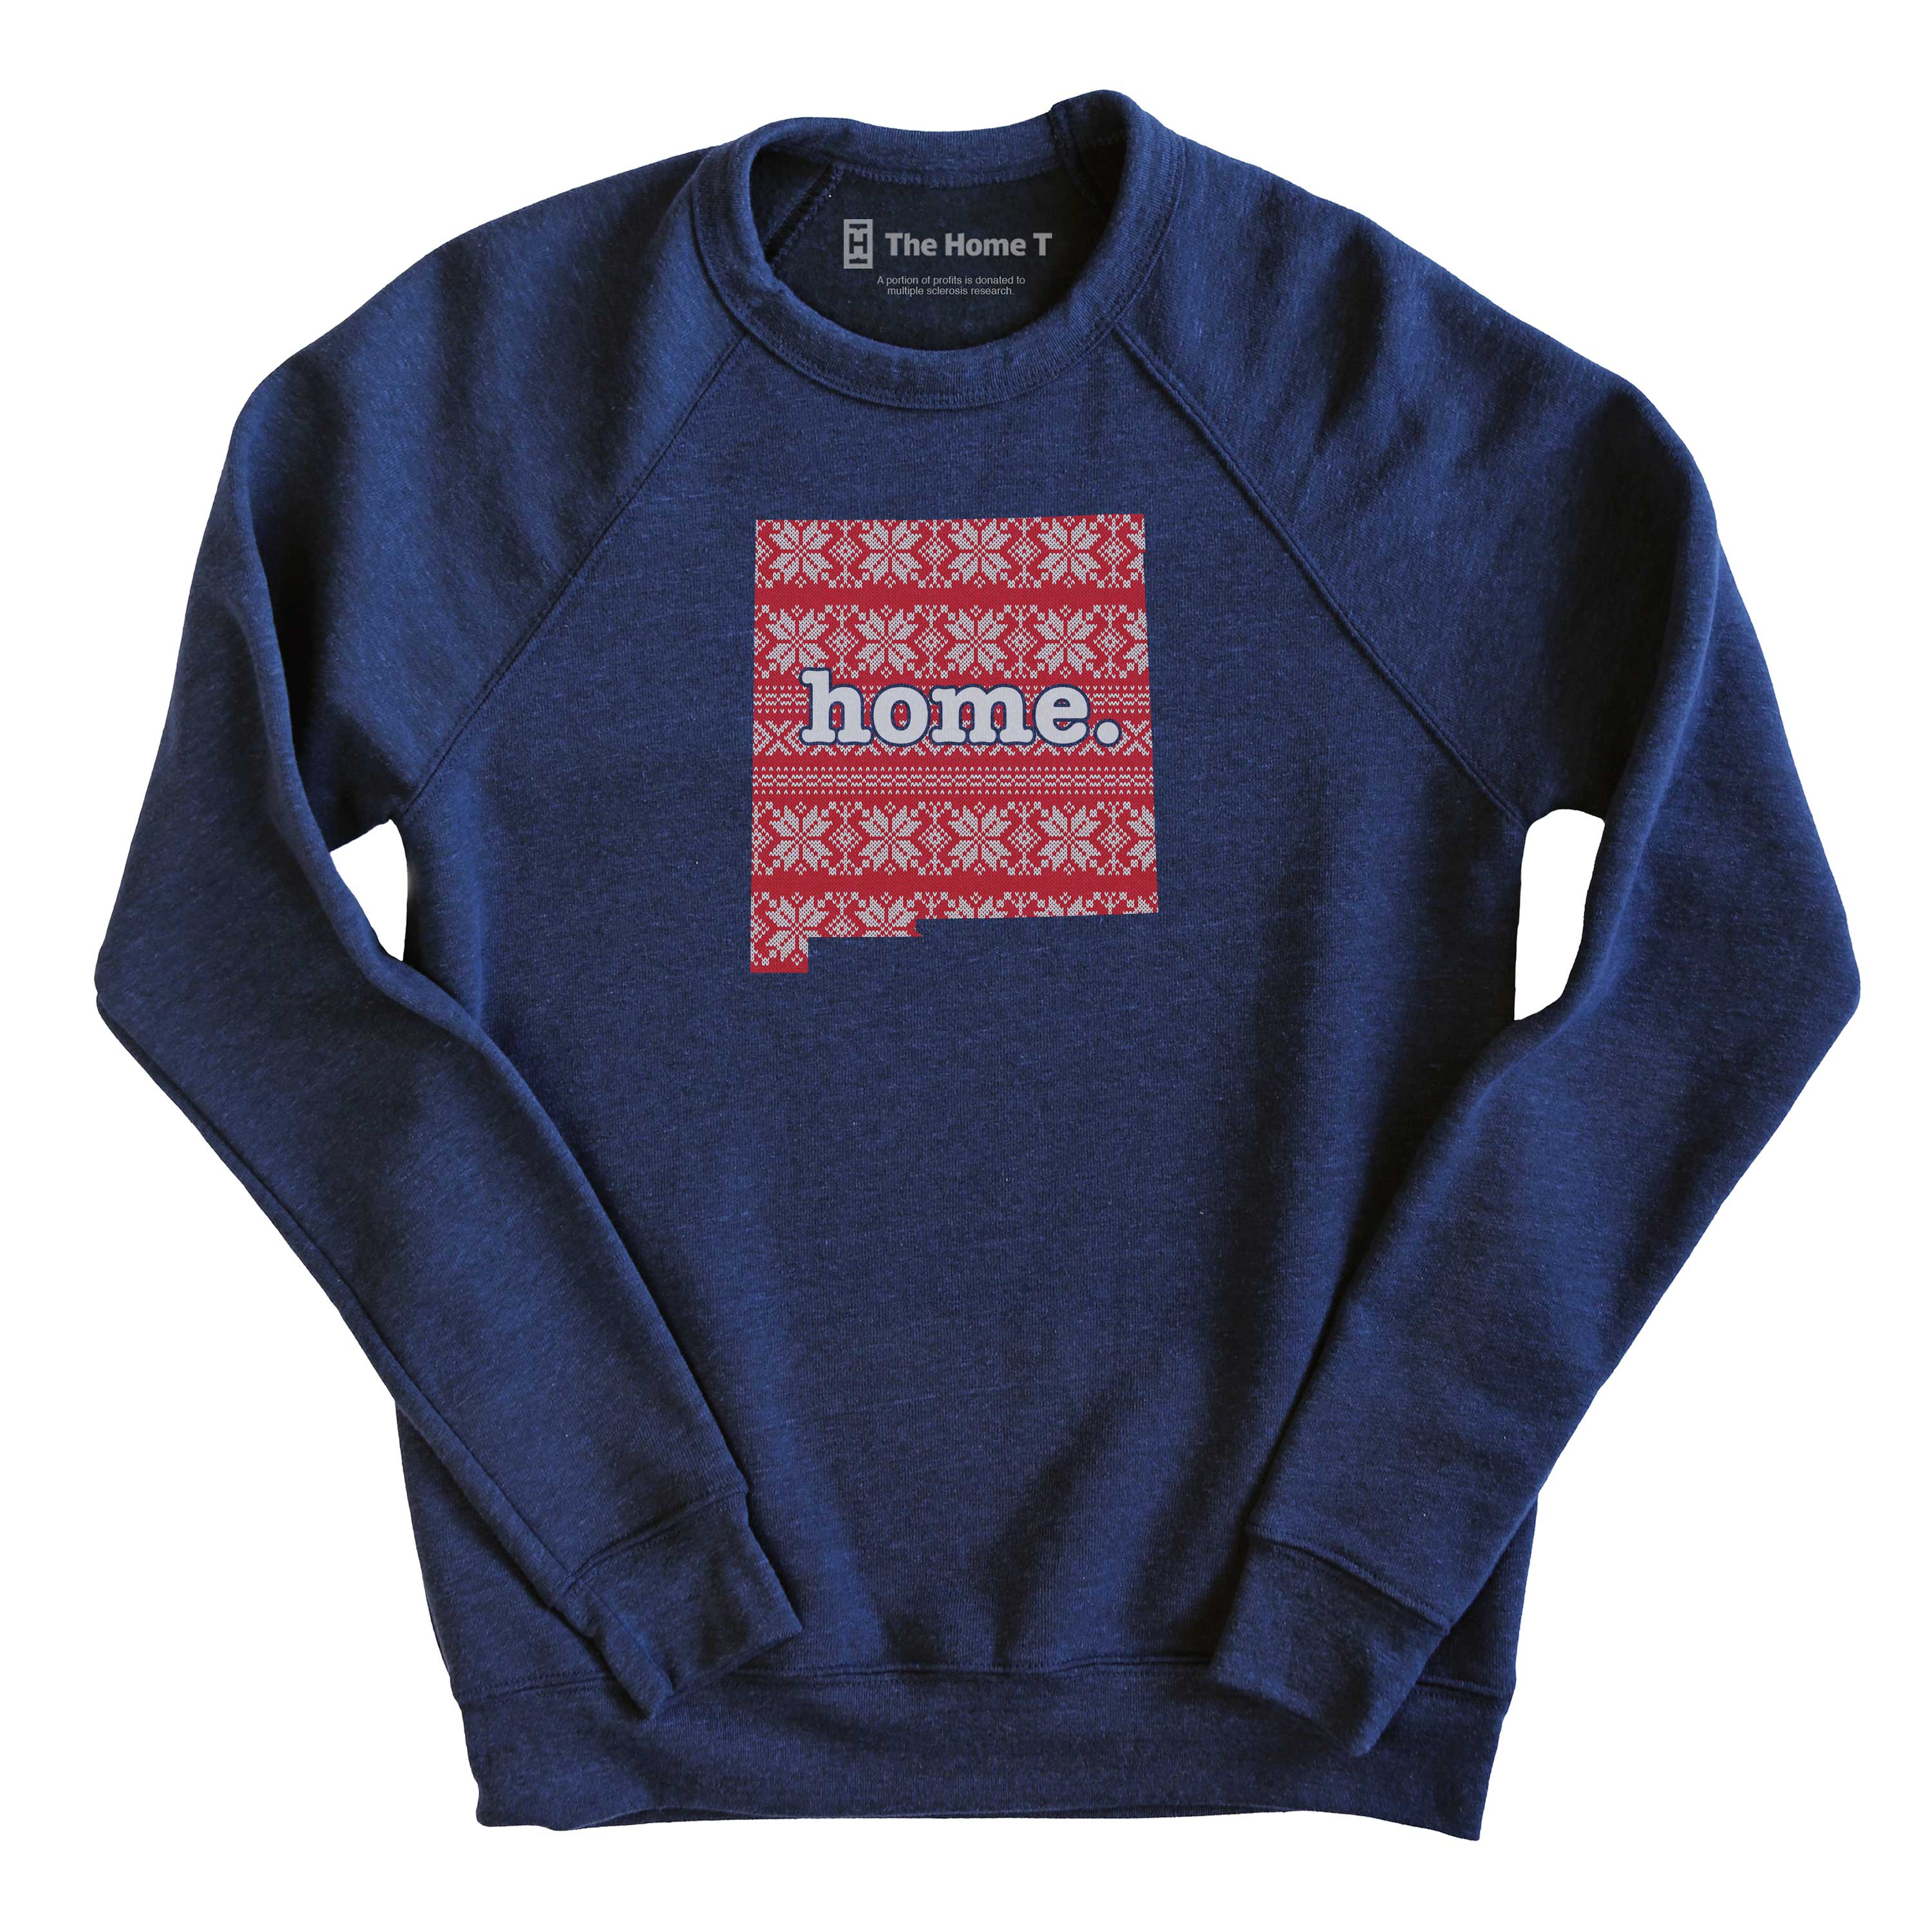 New Mexico Christmas Sweater Pattern Christmas Sweater The Home T XS Navy Sweatshirt